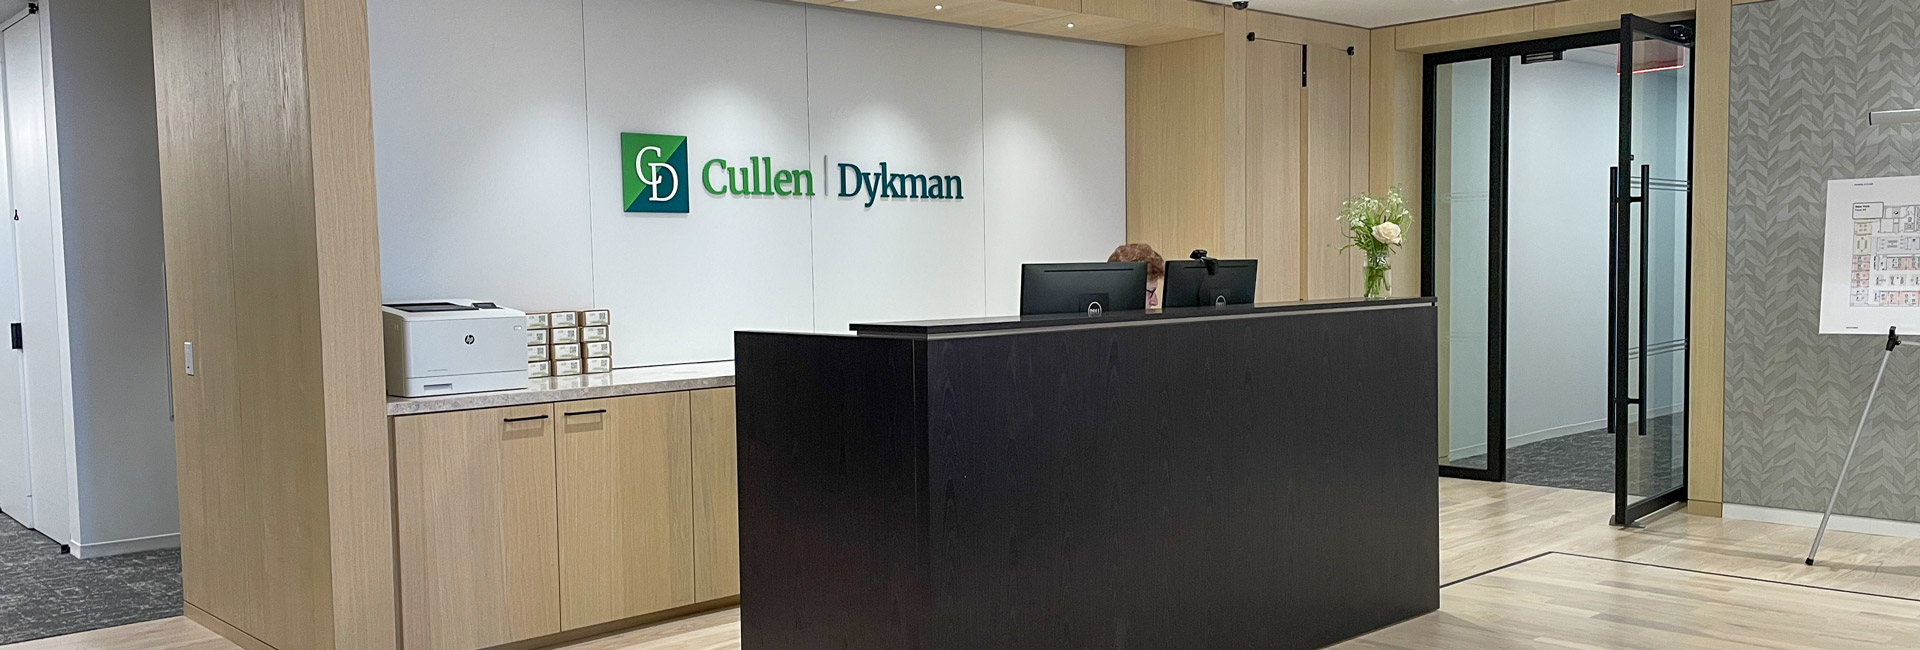 Cullen and Dykman Lobby